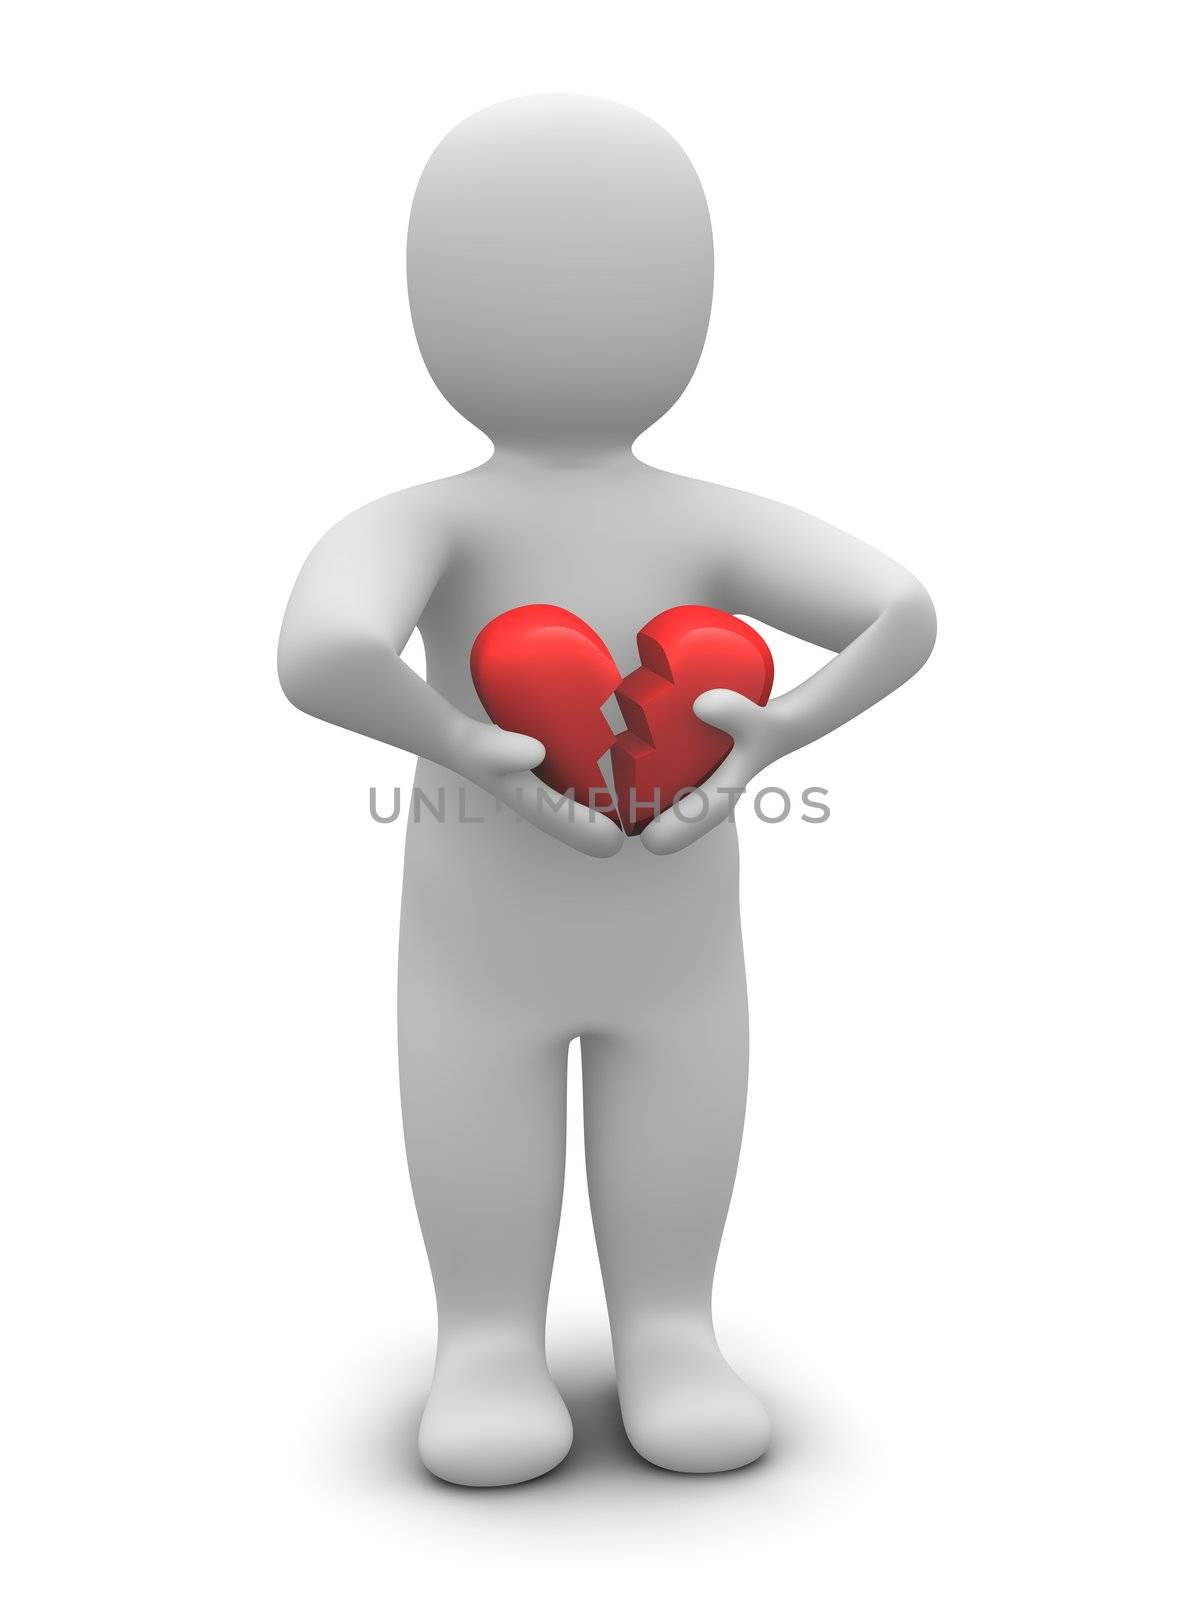 Man with broken heart. 3d rendered illustration isolated on white.